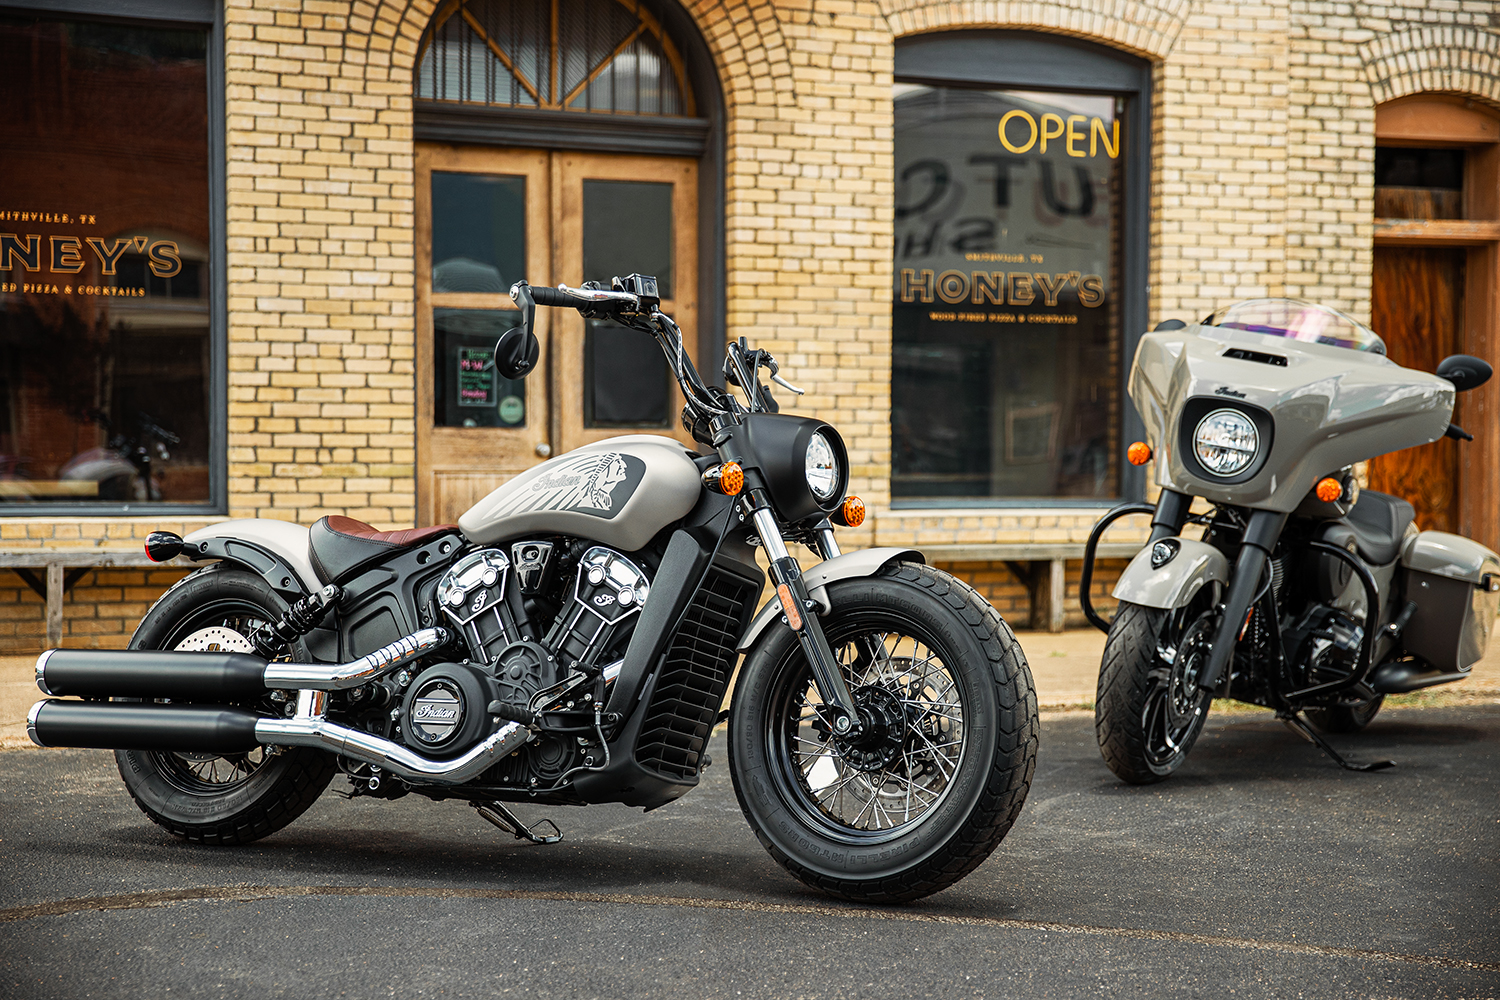 2022 Indian Motorcycle Lineup, First Look Review